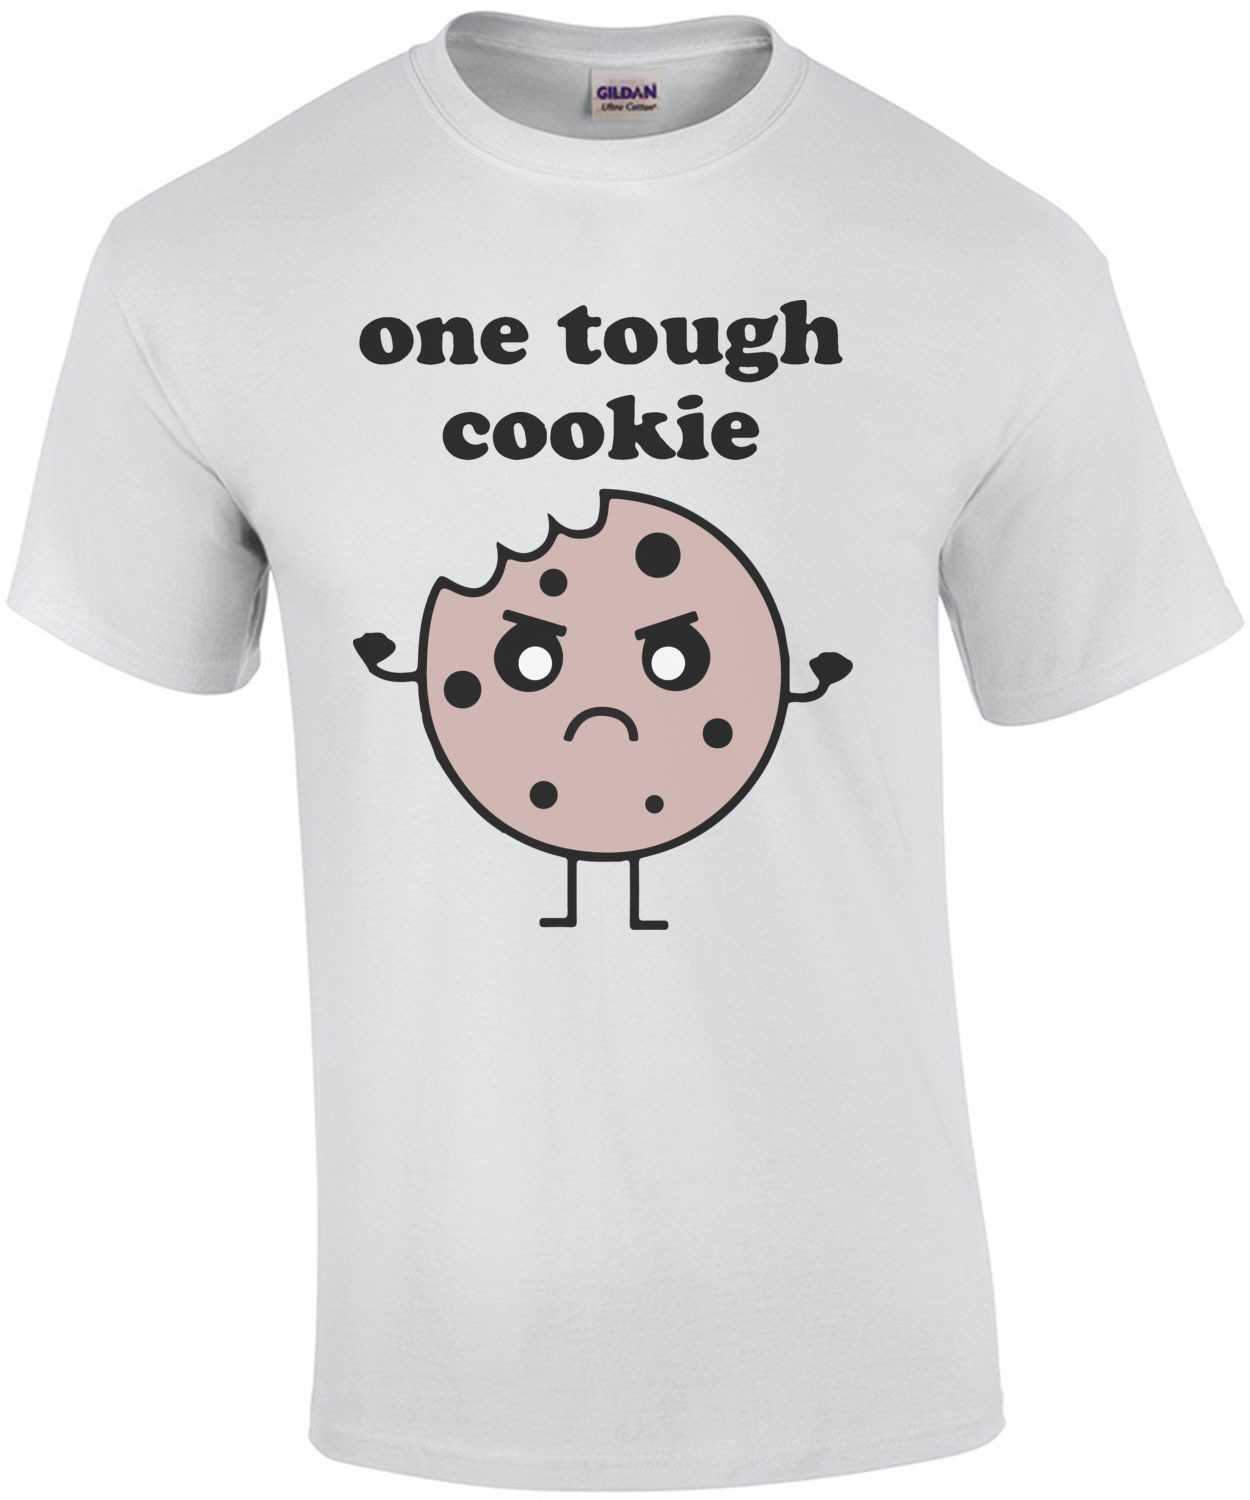 One Tough Cookie - Funny